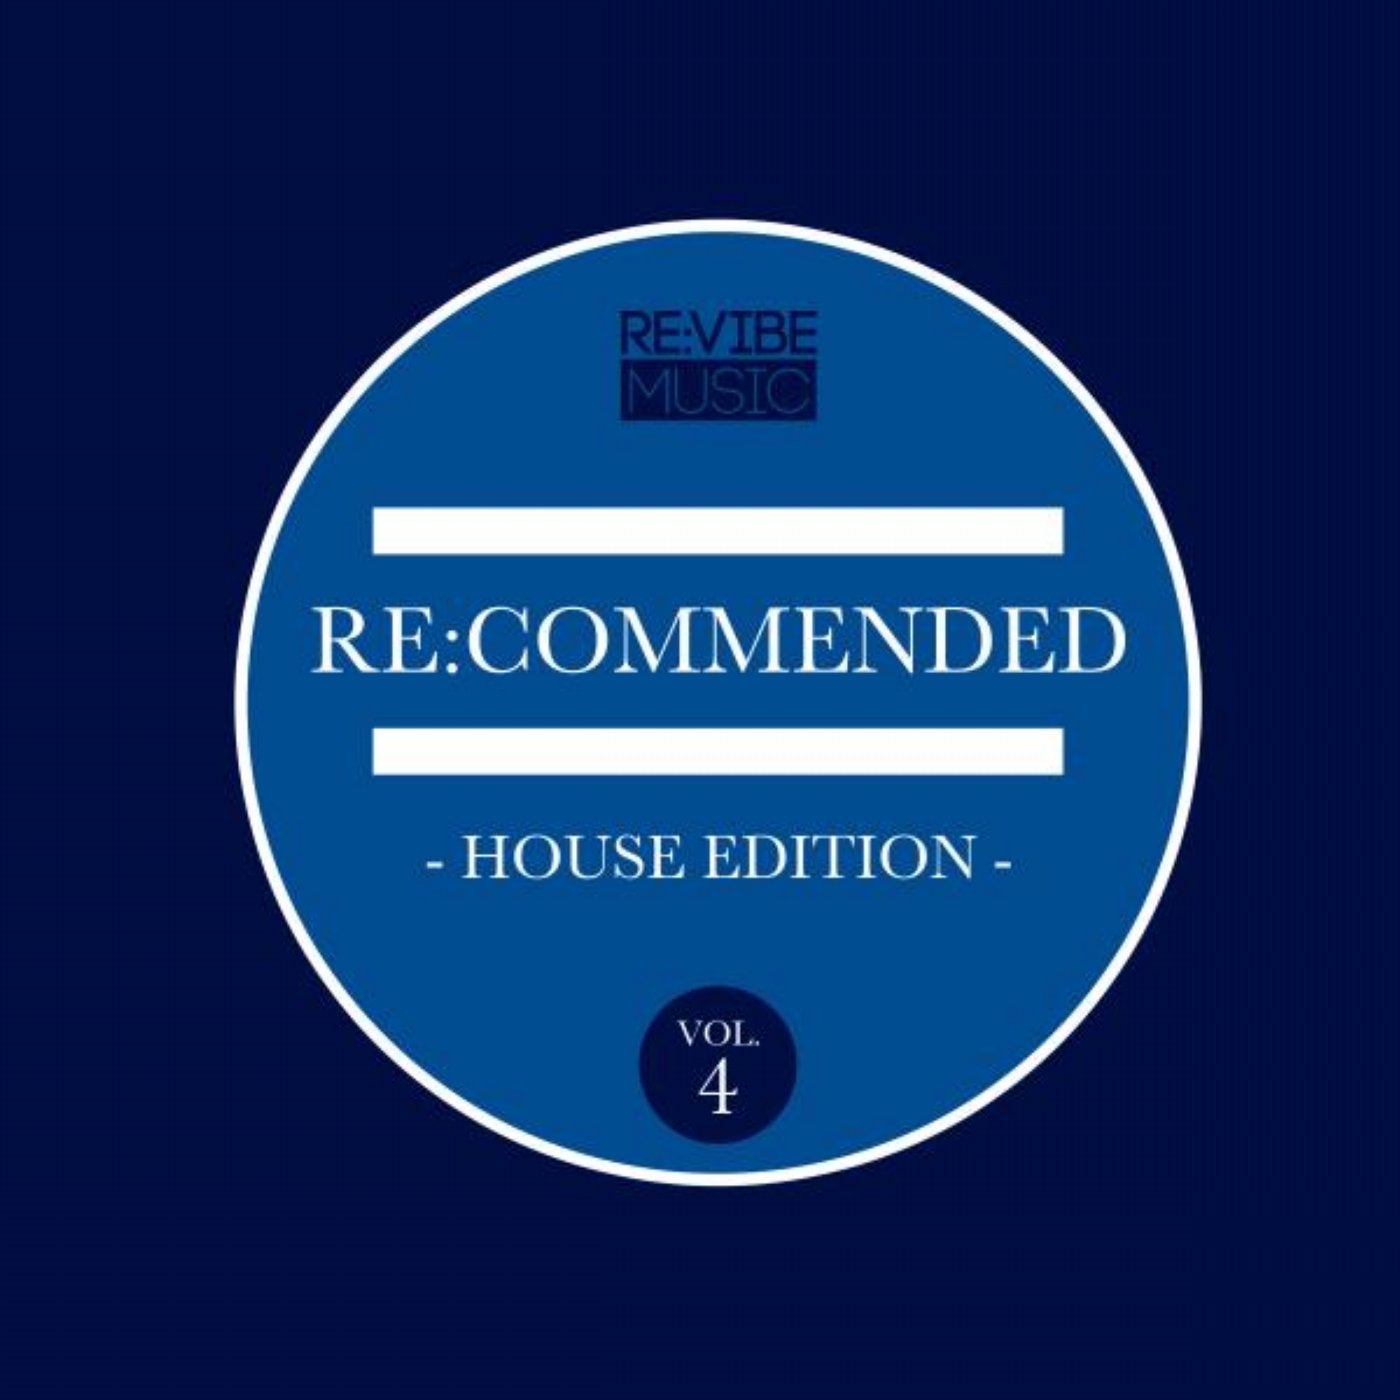 Re:Commended - House Edition, Vol. 4